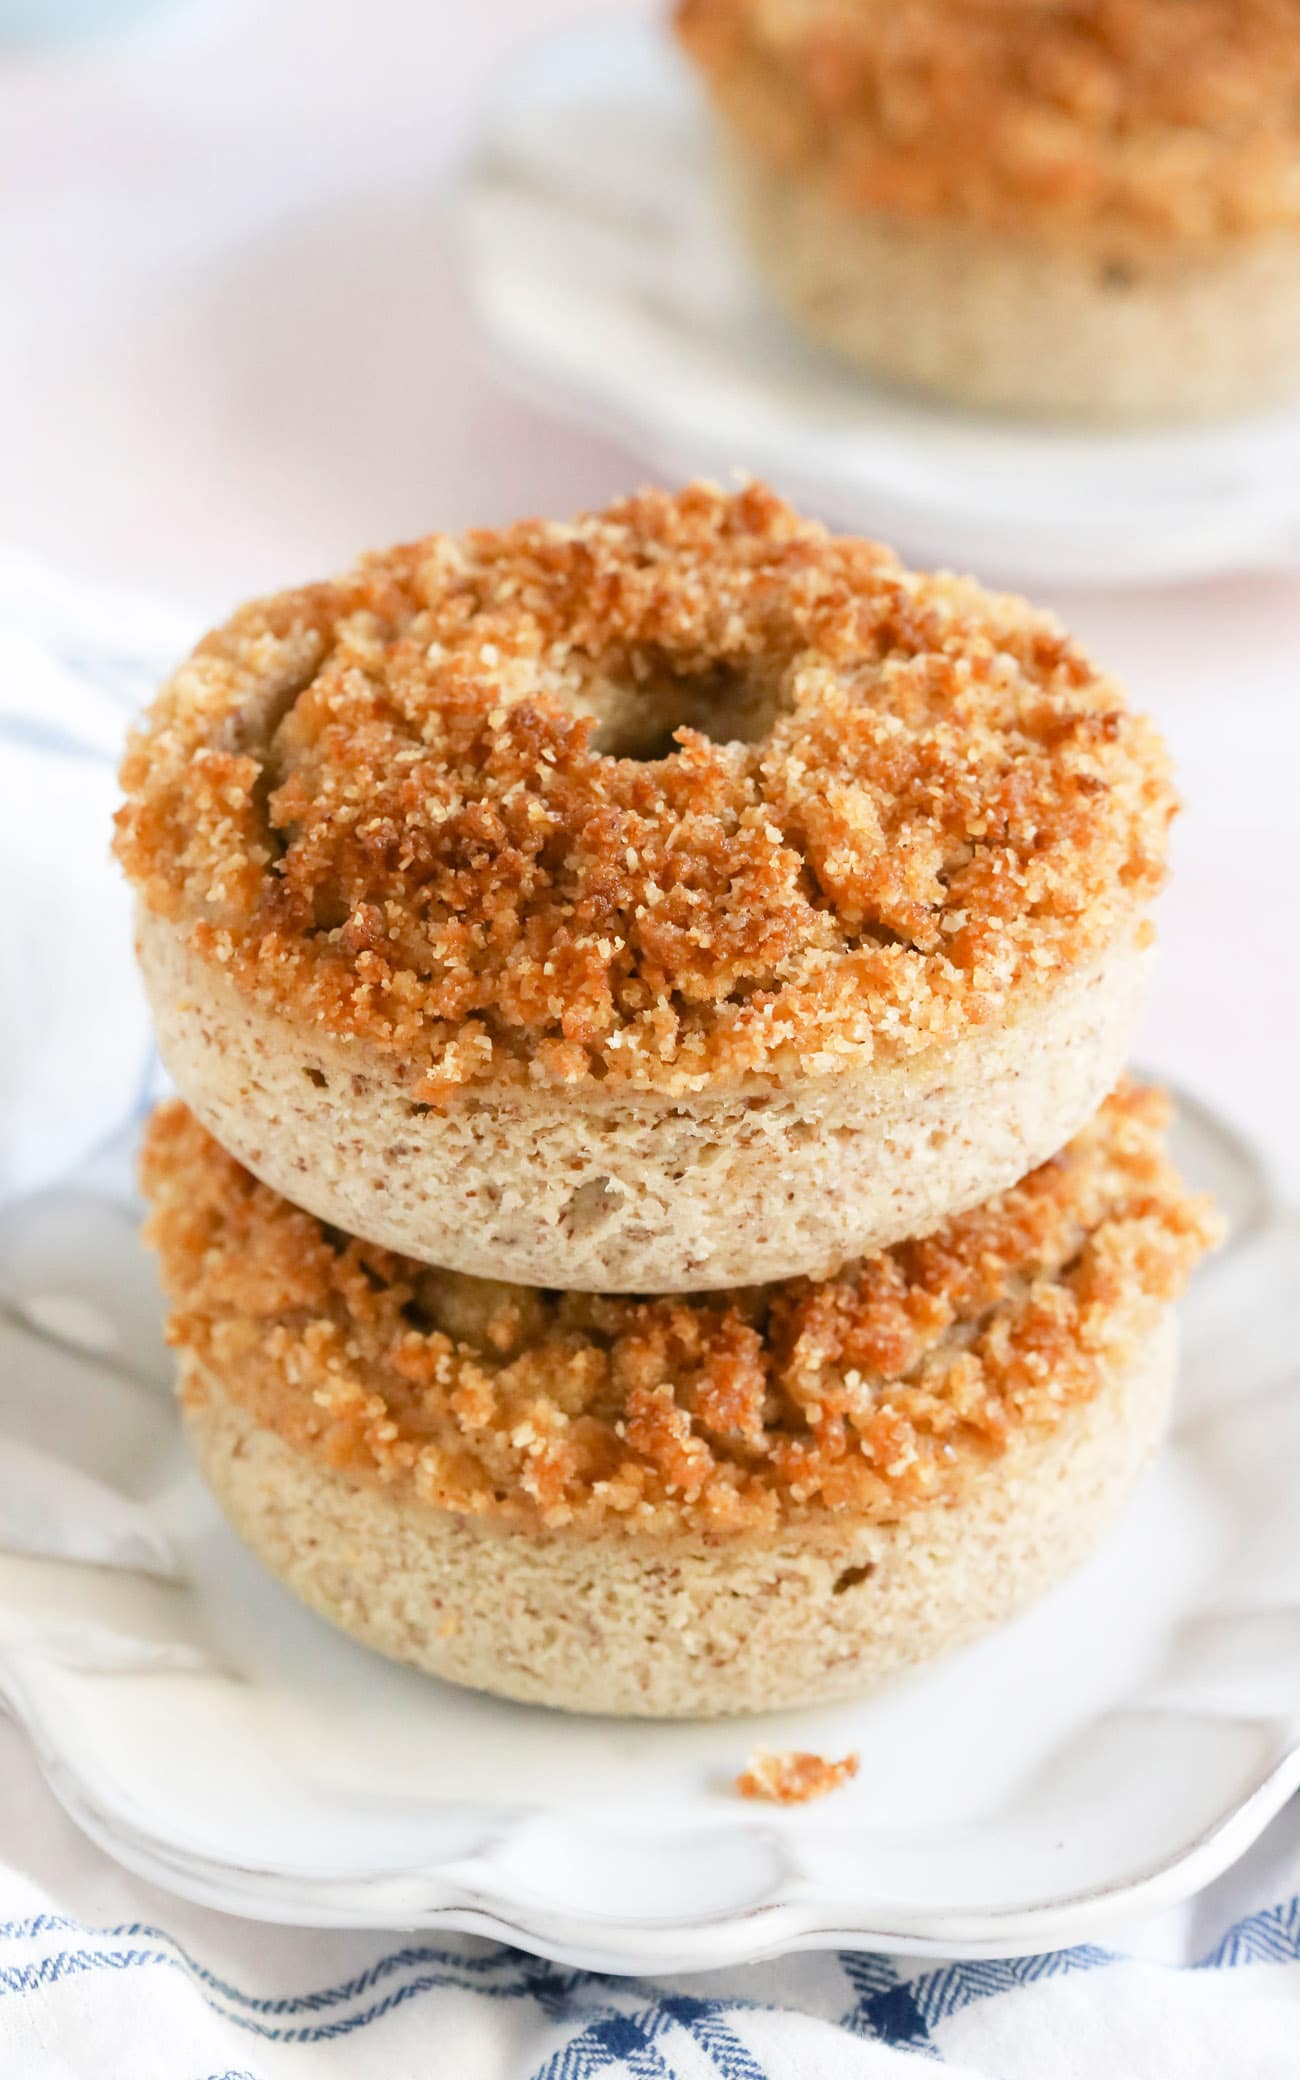 These easy Baked Crumb Donuts are rich, sweet, full of vanilla flavor, and a coffee cake-like crumb topping. Every bite is buttery and satisfying. You'd never know these donuts are gluten free, high protein, high fiber, and low sugar!